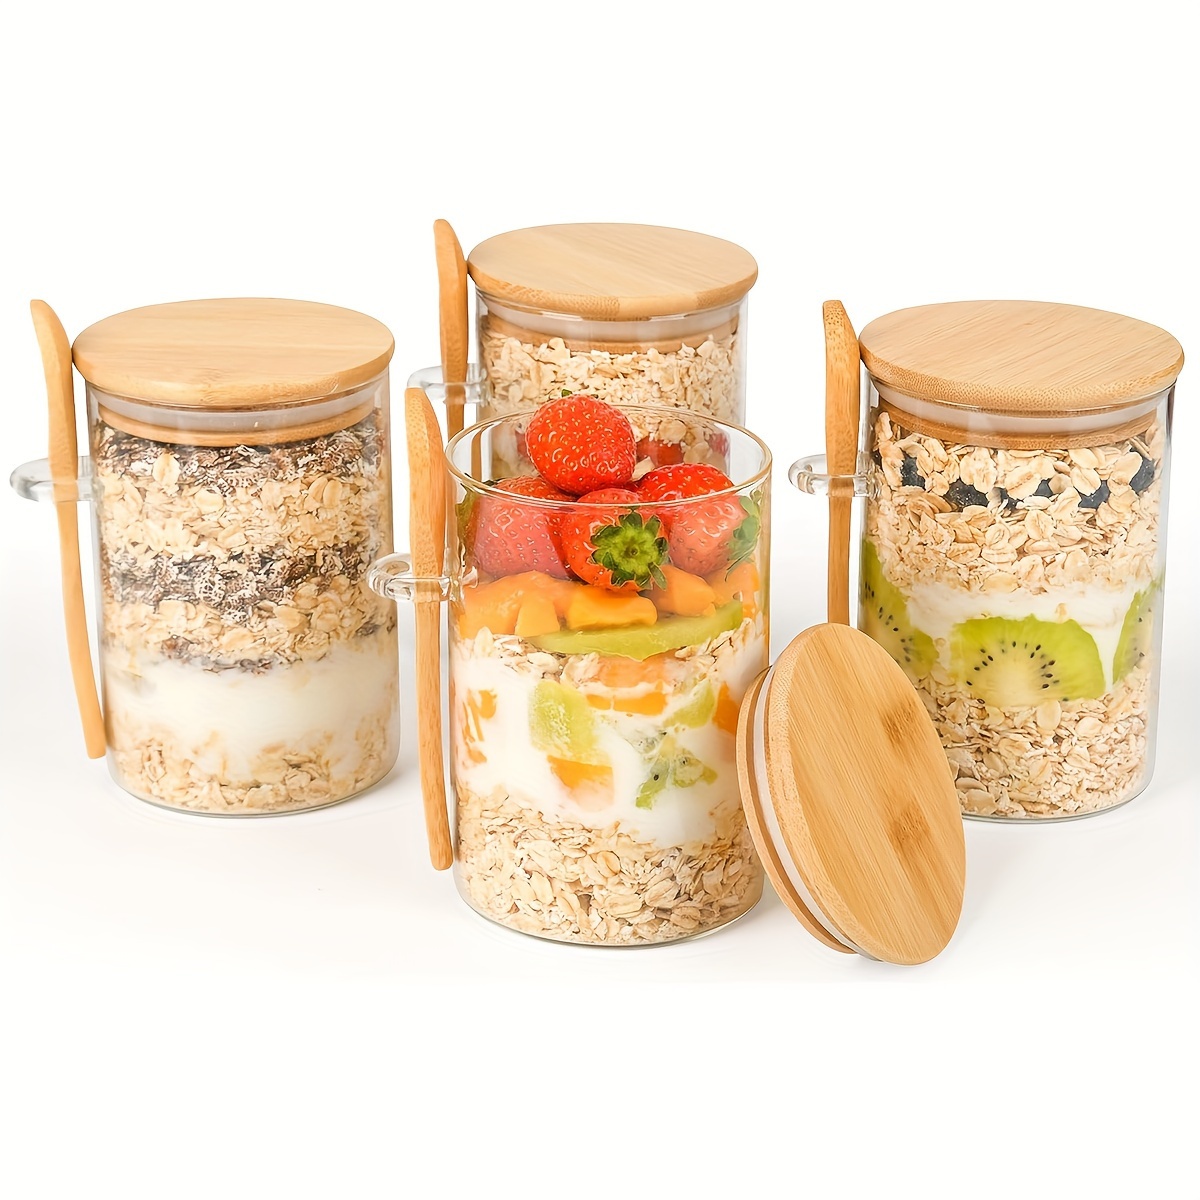 

4pcs Overnight Oat Container With Lid. Overnight Oat Can With Spoon Chia Seed Pudding Salad Glass Jar. Bamboo Covered Cereal Coffee Powder Bread Starter Storage Jar